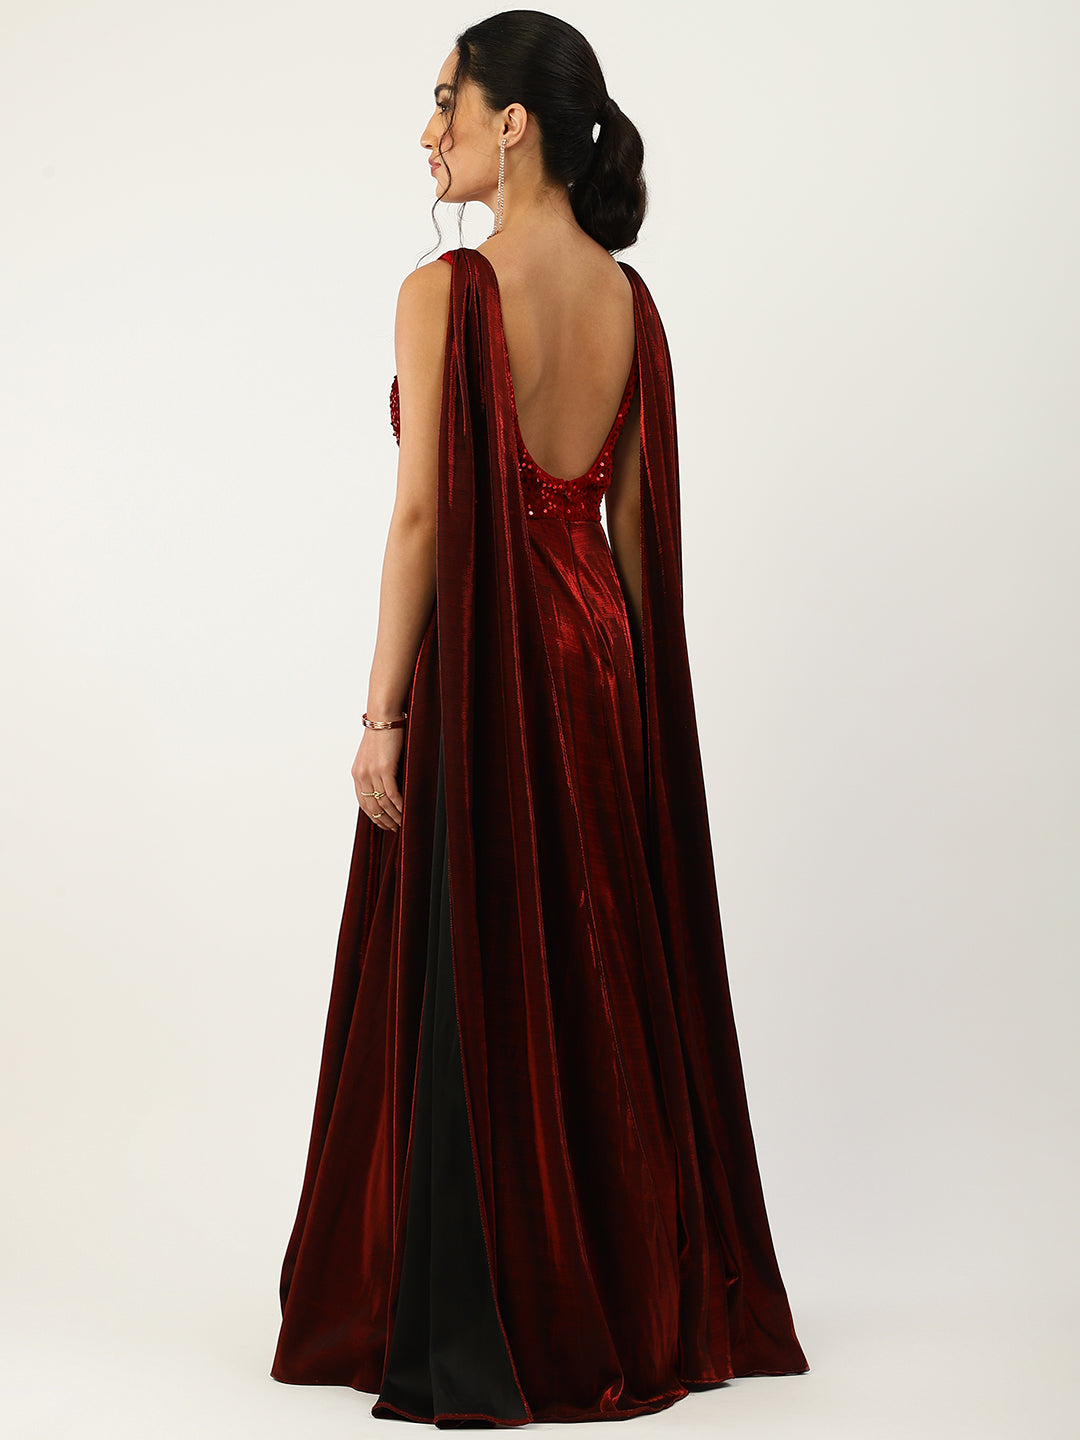 Maroon Velvet Embellished Ball Gown with Drape Sleeves